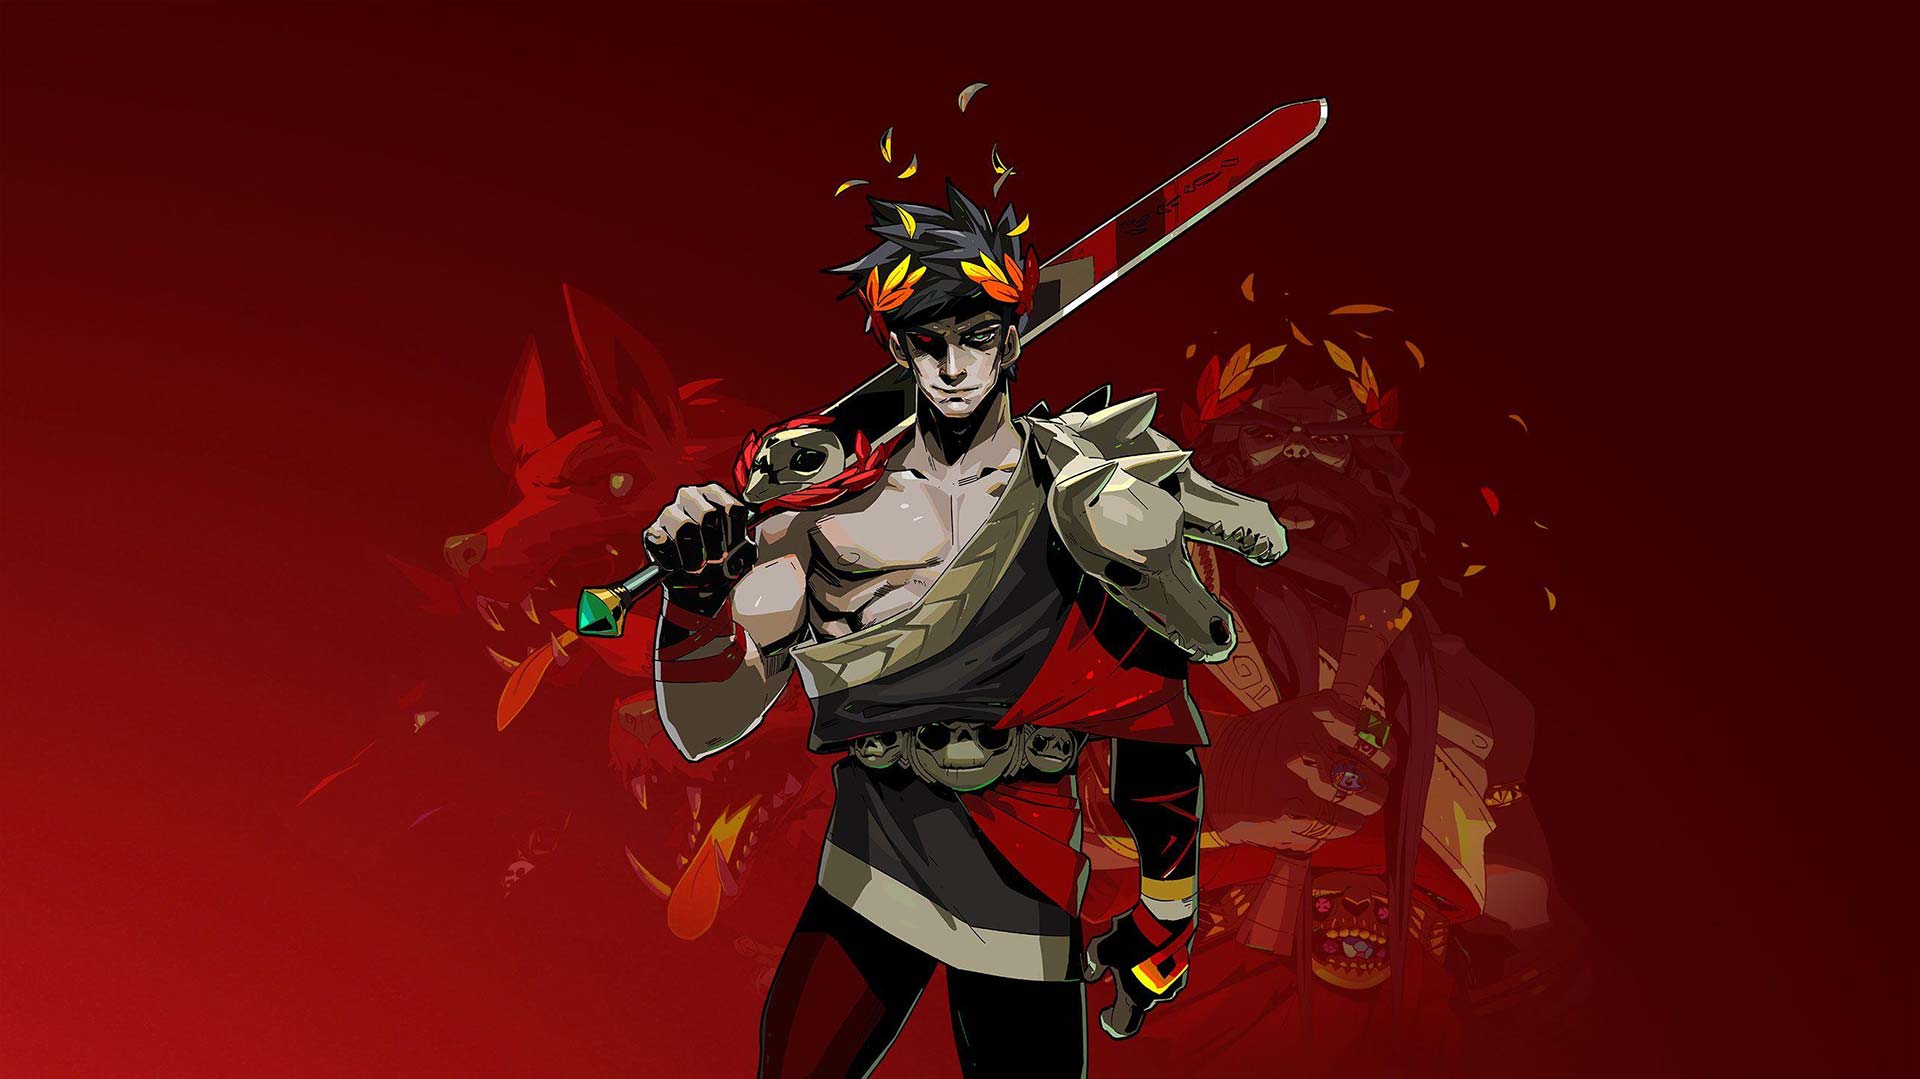 Zagreus character in the game Hades